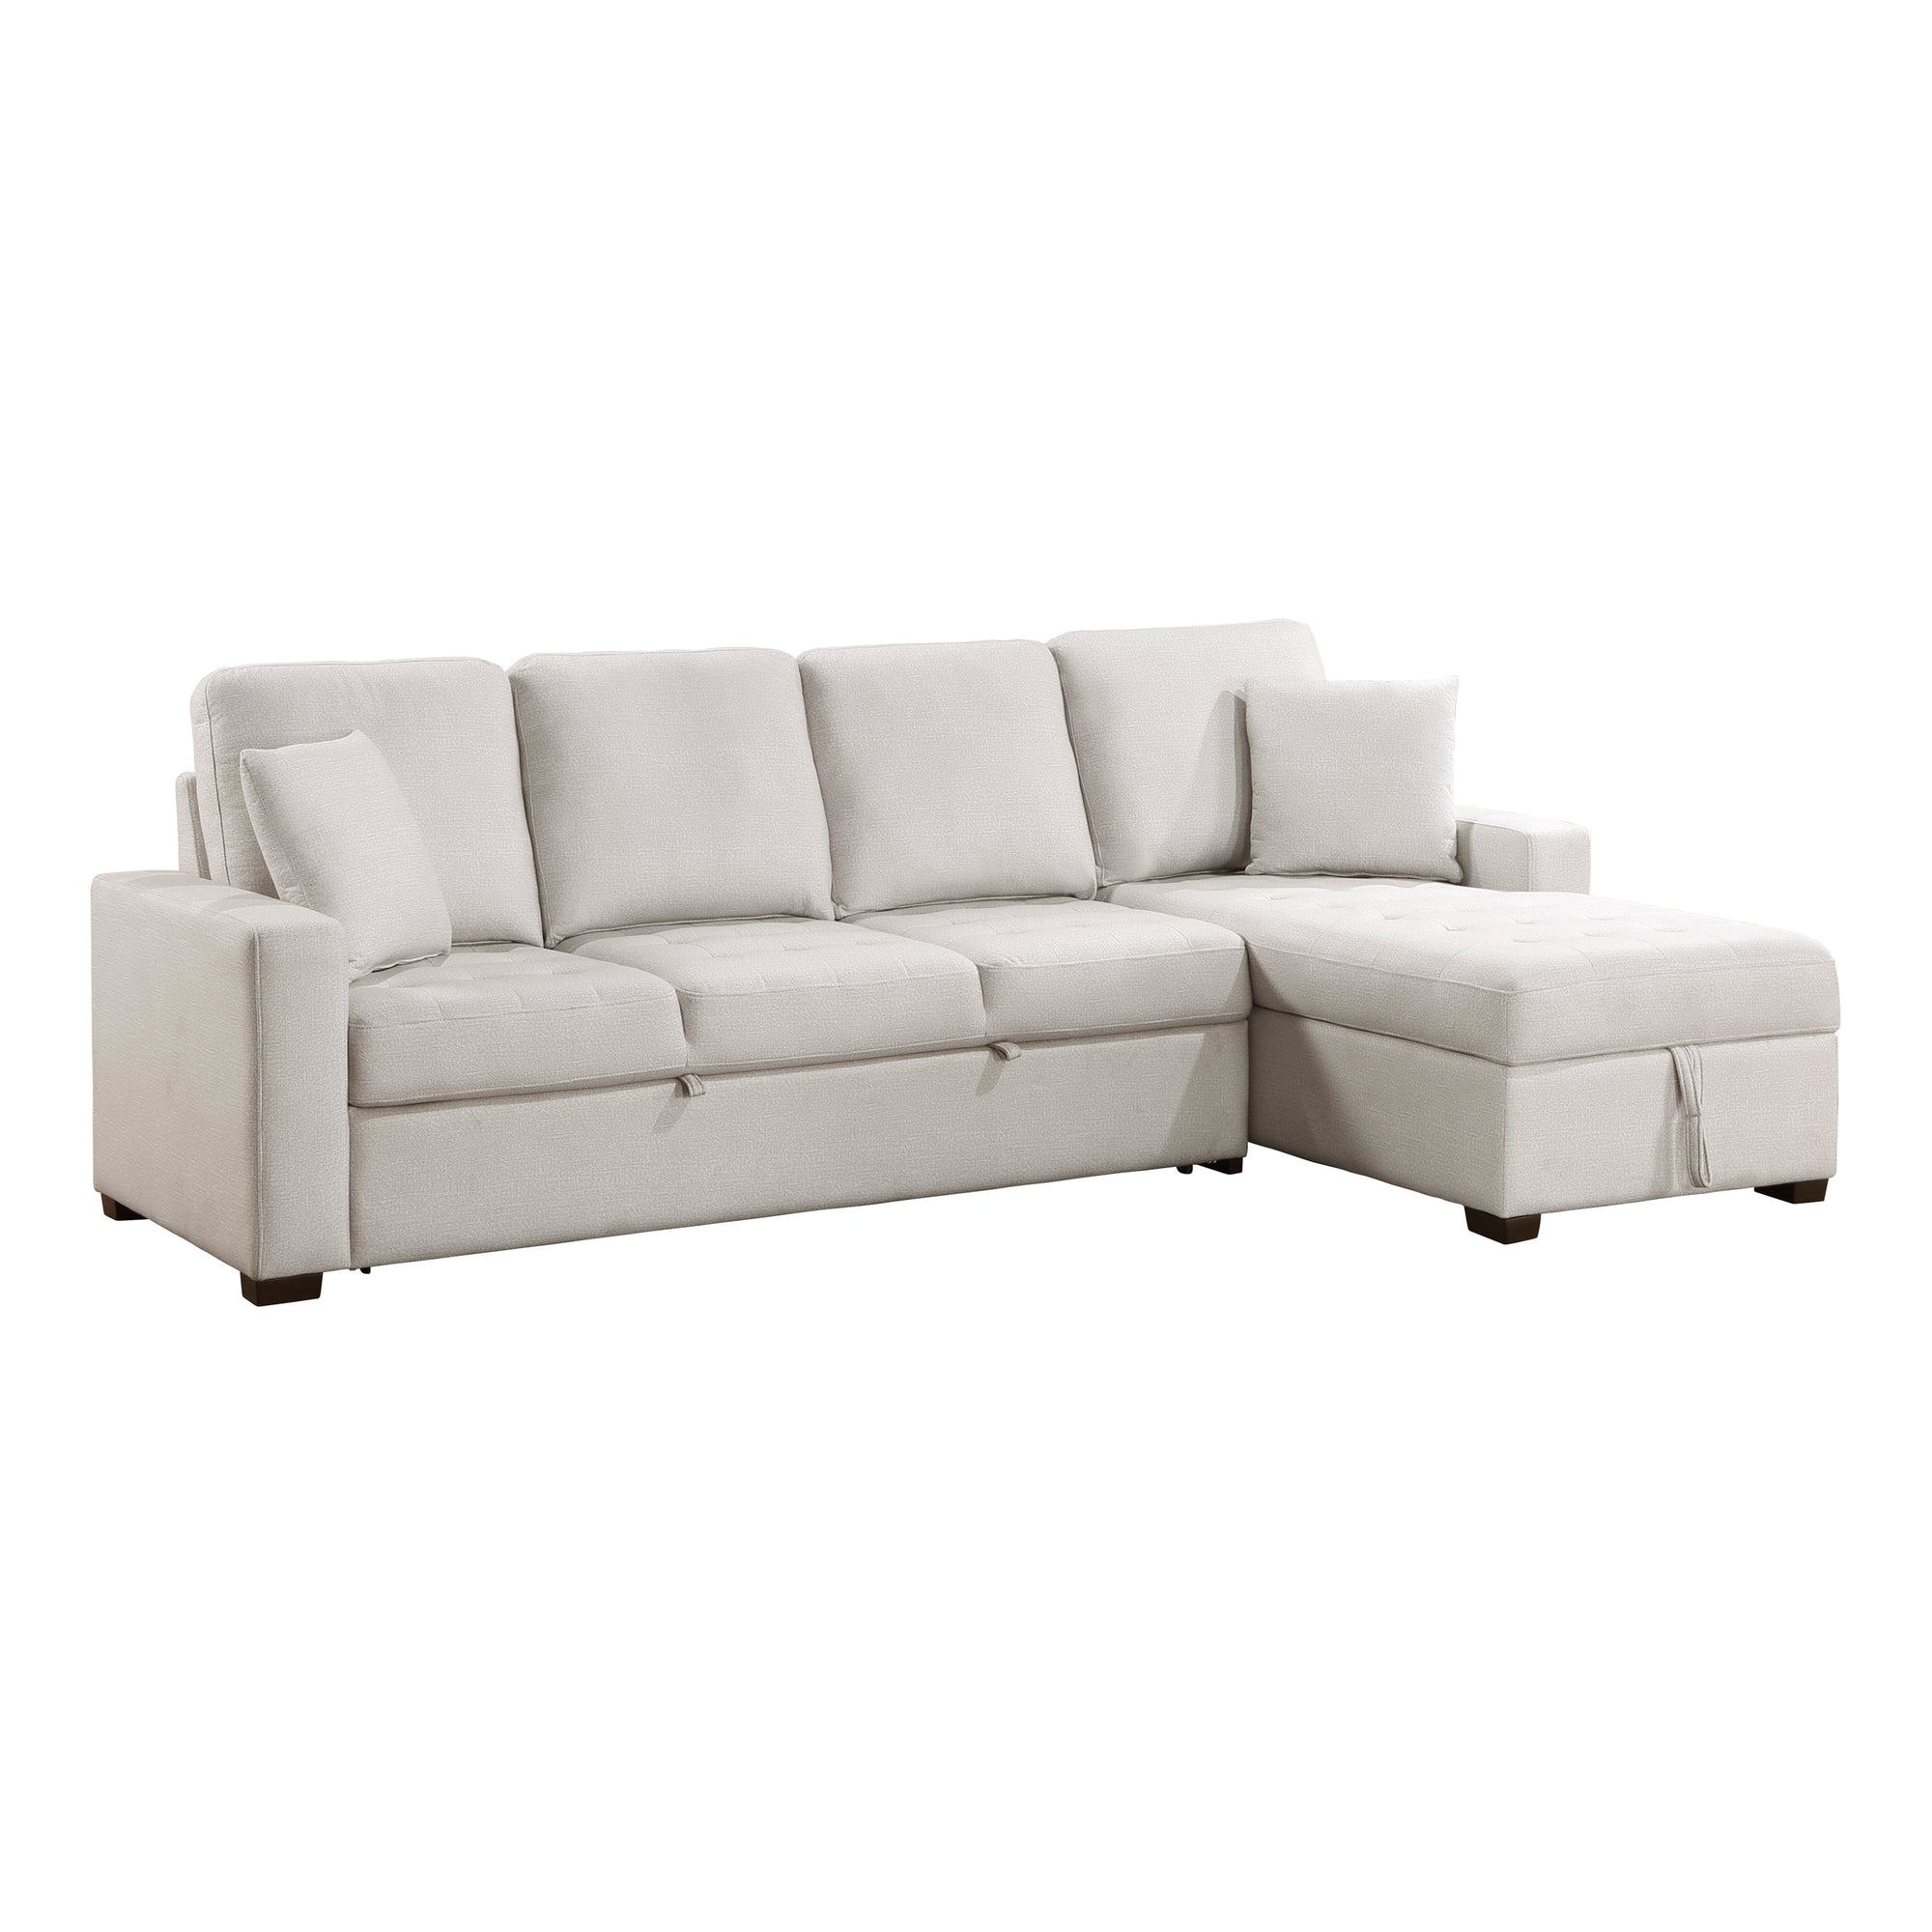 Bernard 2-Piece Sectional Sofa Sleeper with Right Chaise